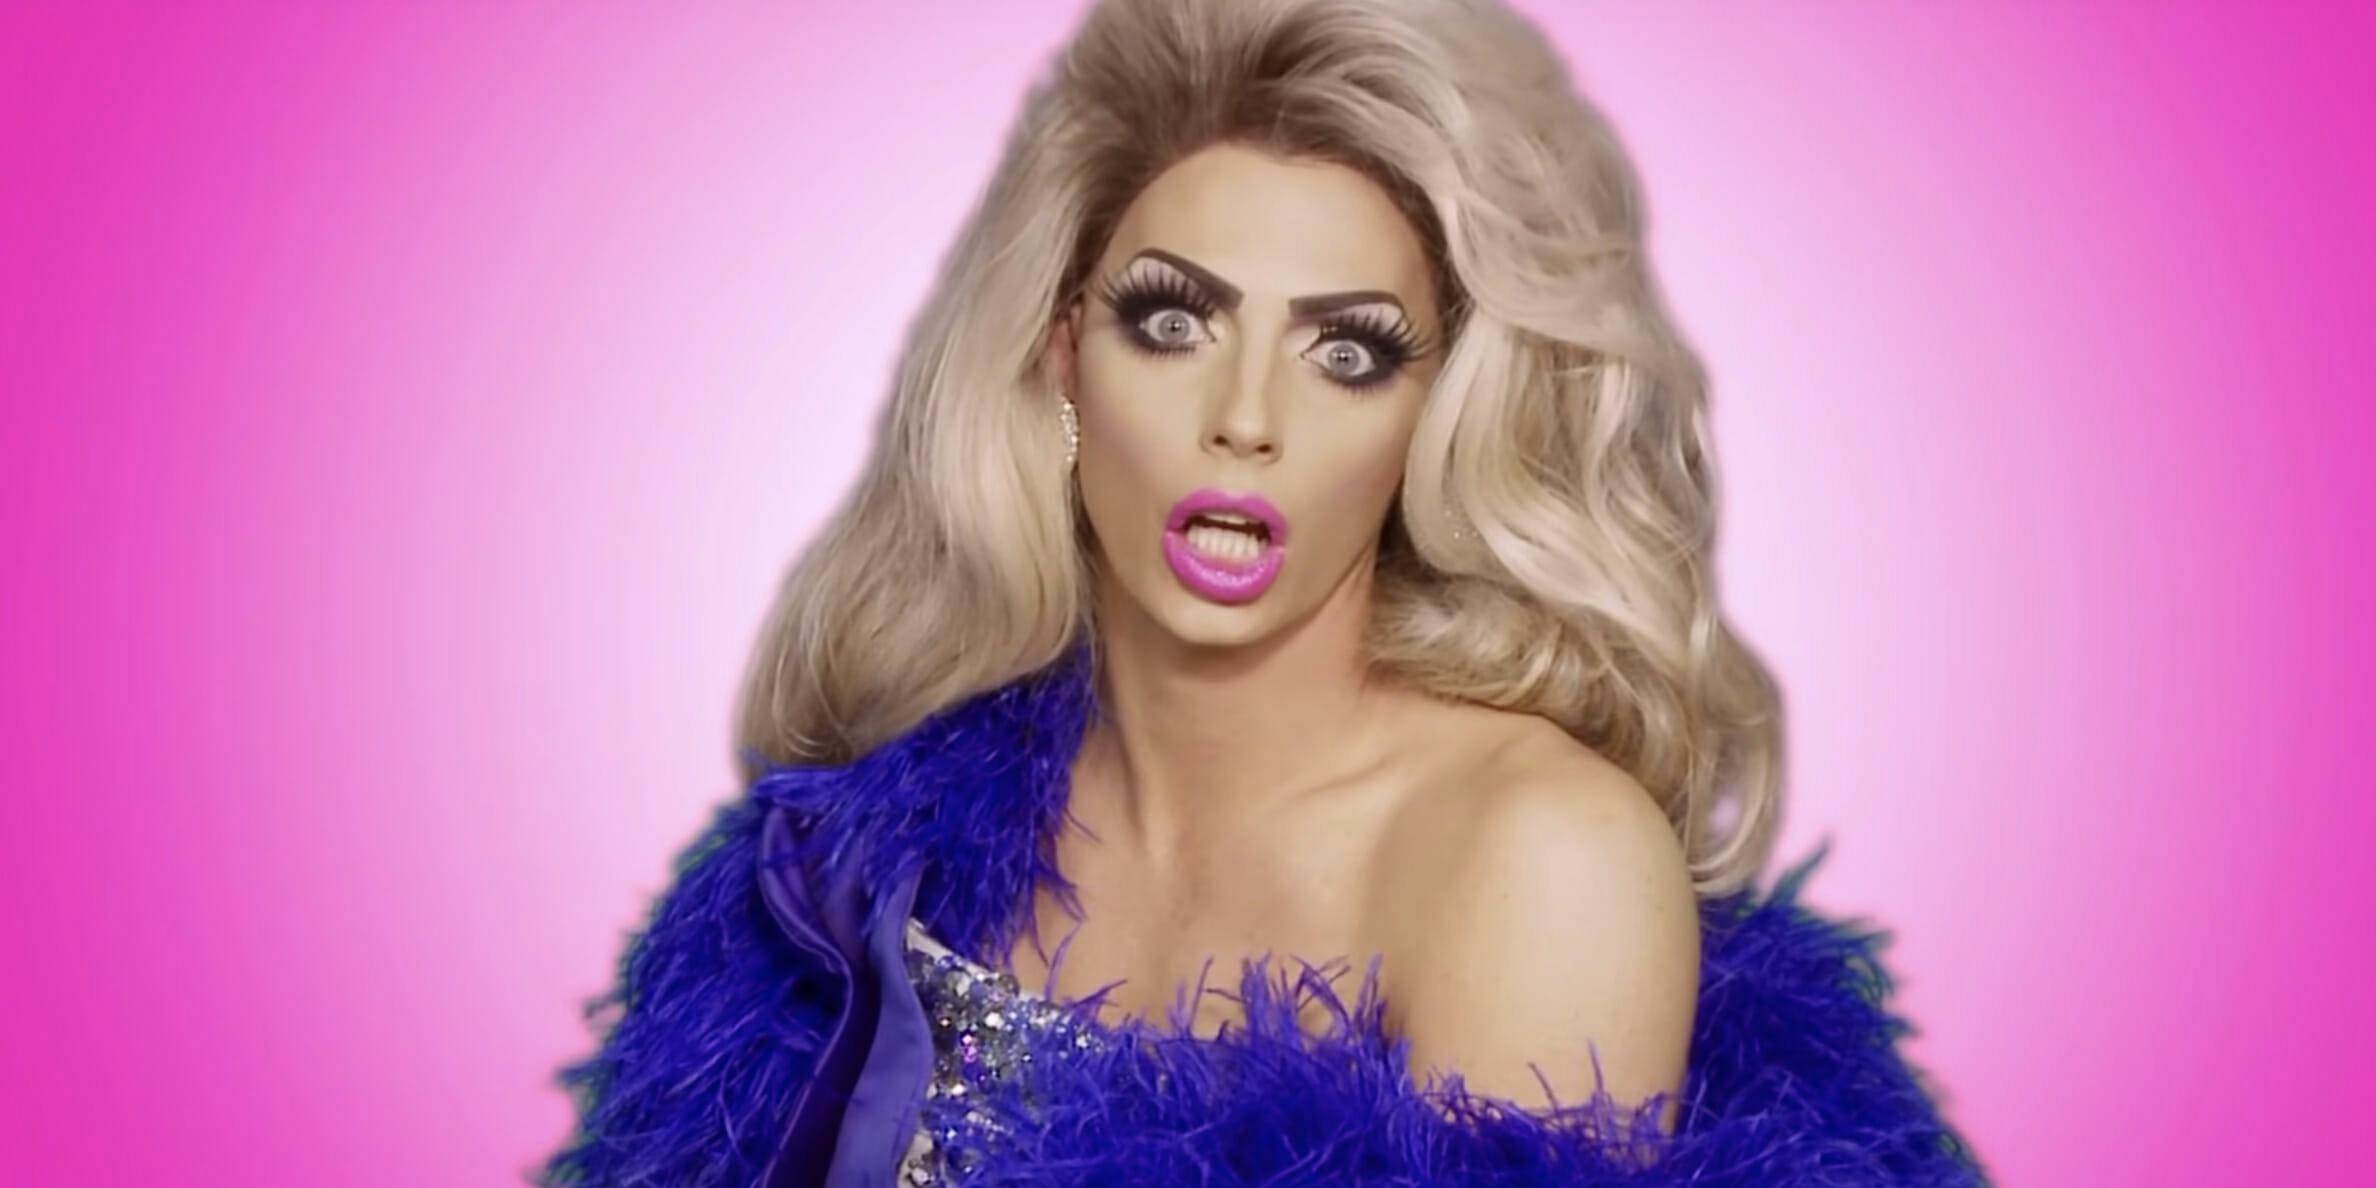 'RuPaul’s Drag Race' queen Alyssa Edwards is getting her own documentary series on Netflix.